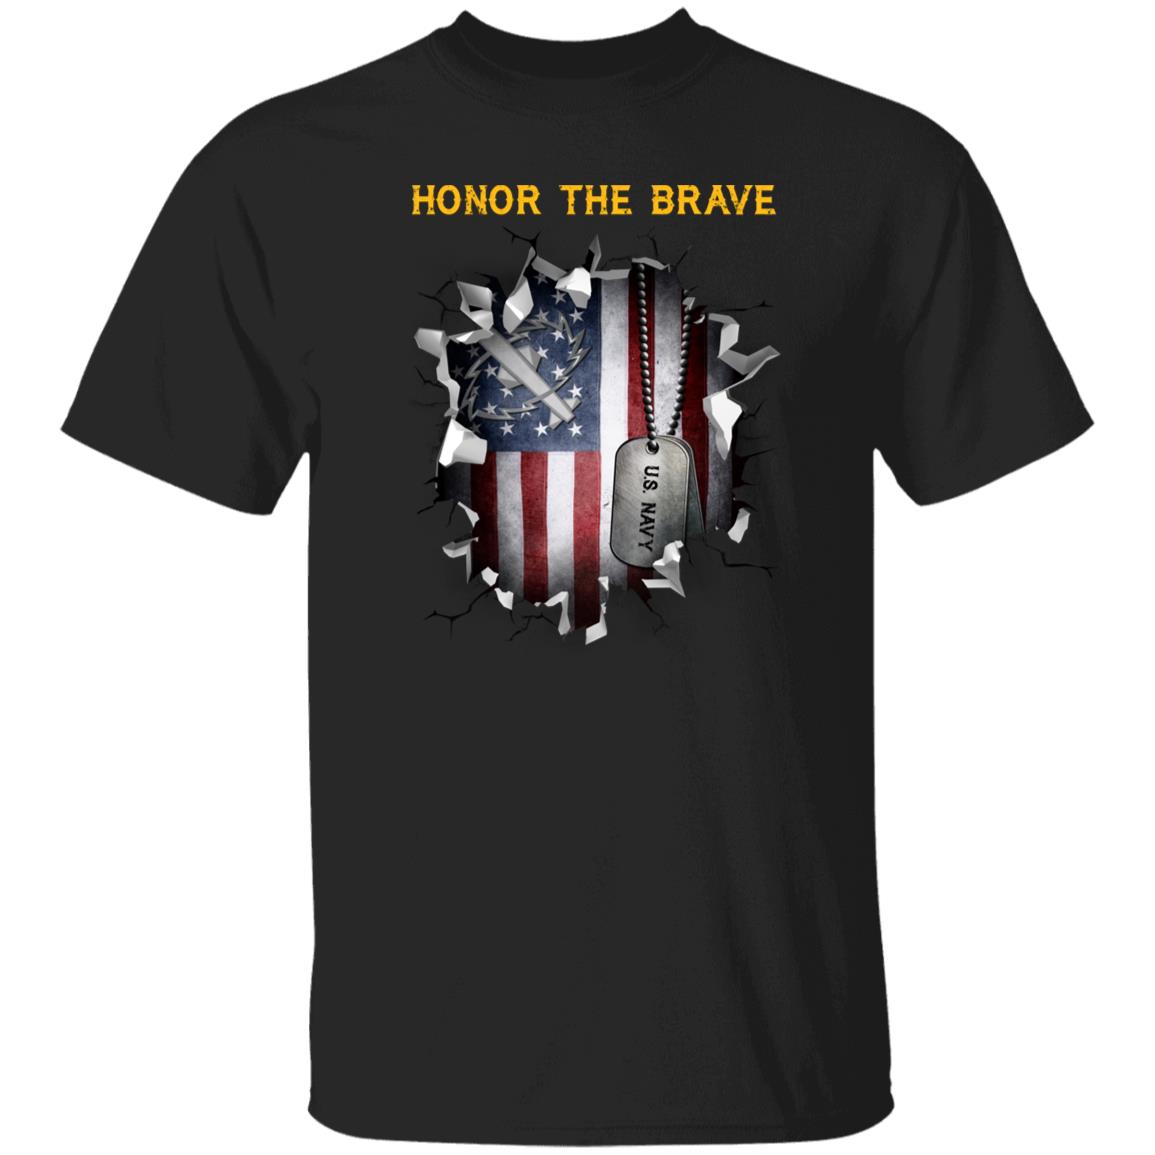 Navy Missile Technician Navy MT - Honor The Brave Front Shirt